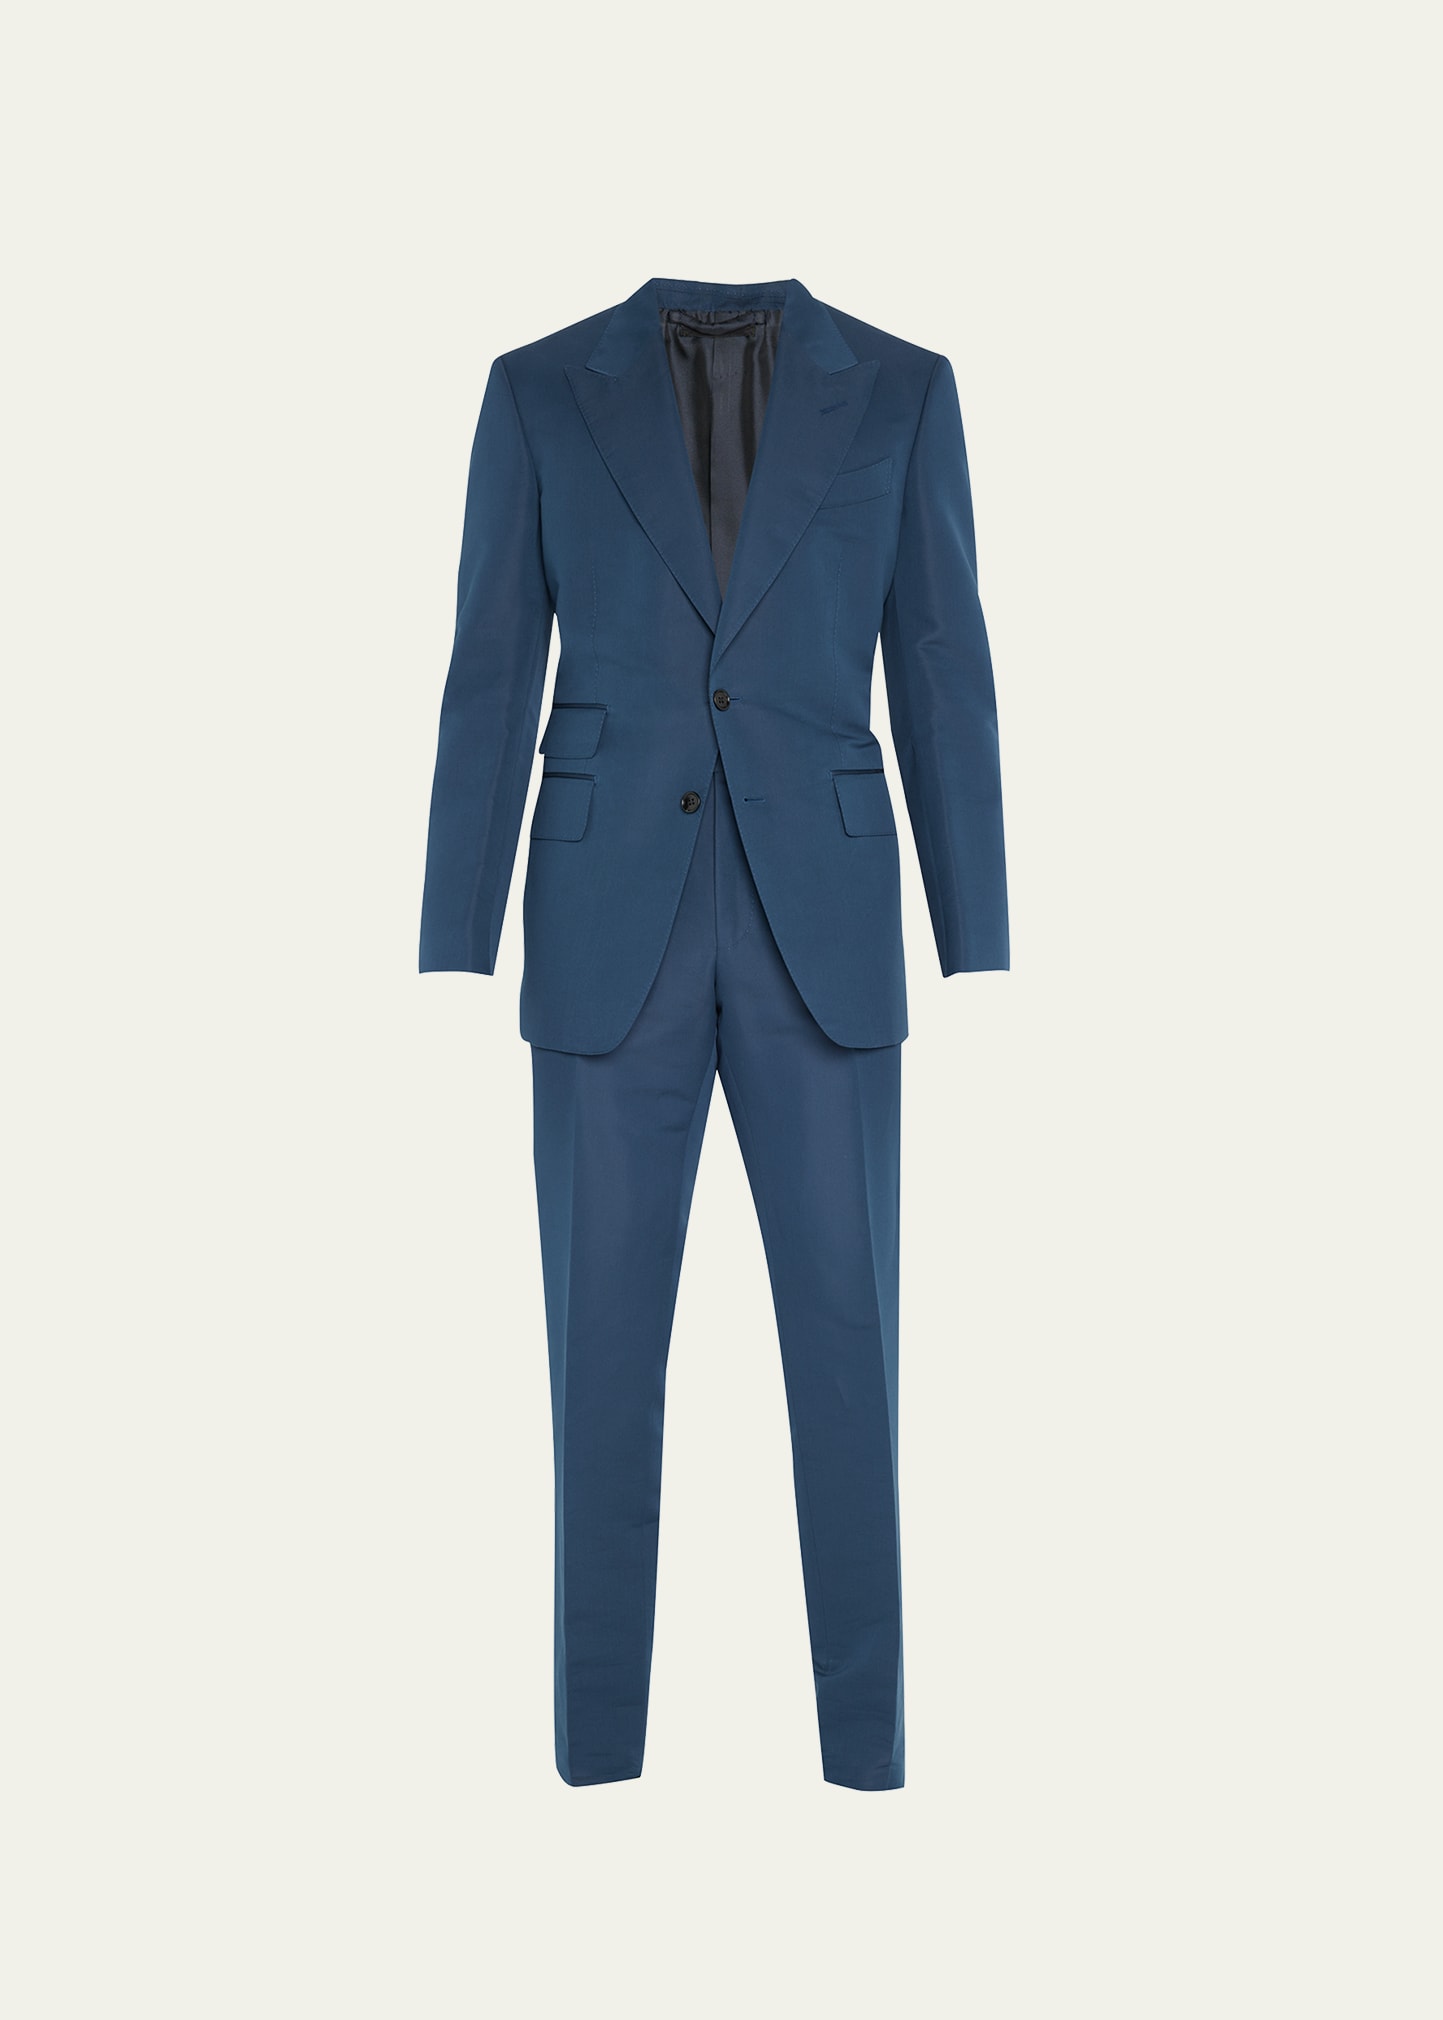 Tom Ford Men's Shelton Piece-dyed Poplin Suit In Navy Solid